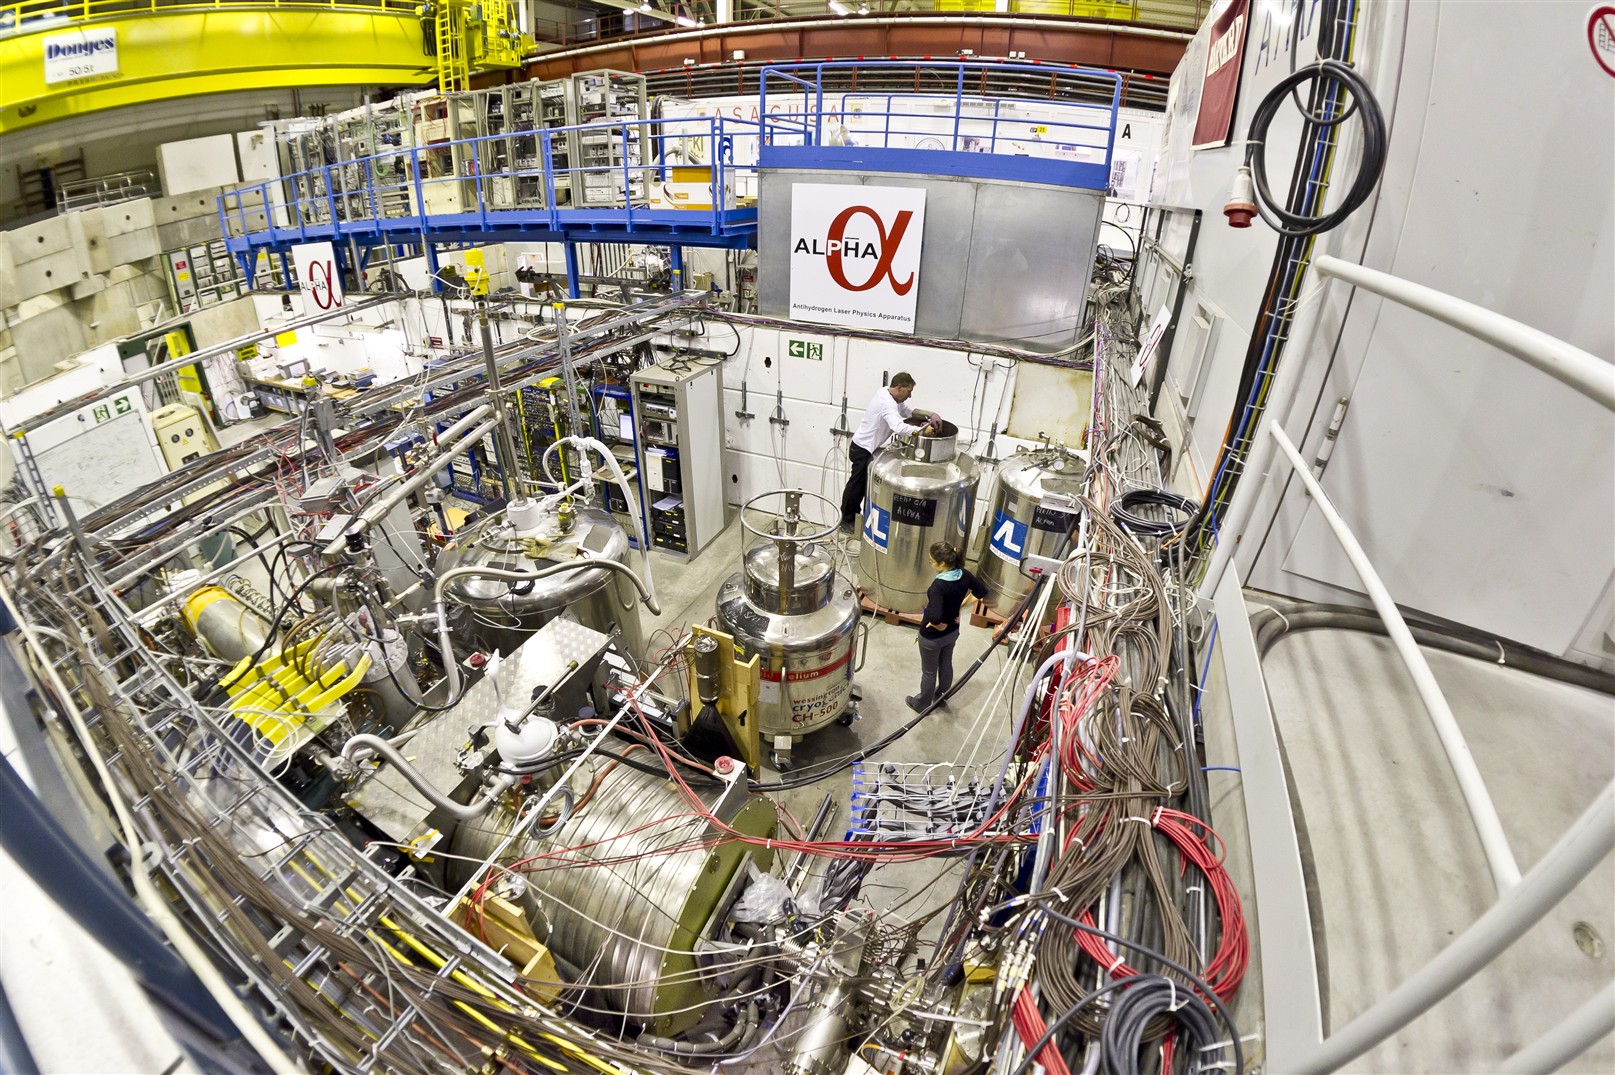 The ALPHA experiment in the Antiproton Decelerator hall at CERN.